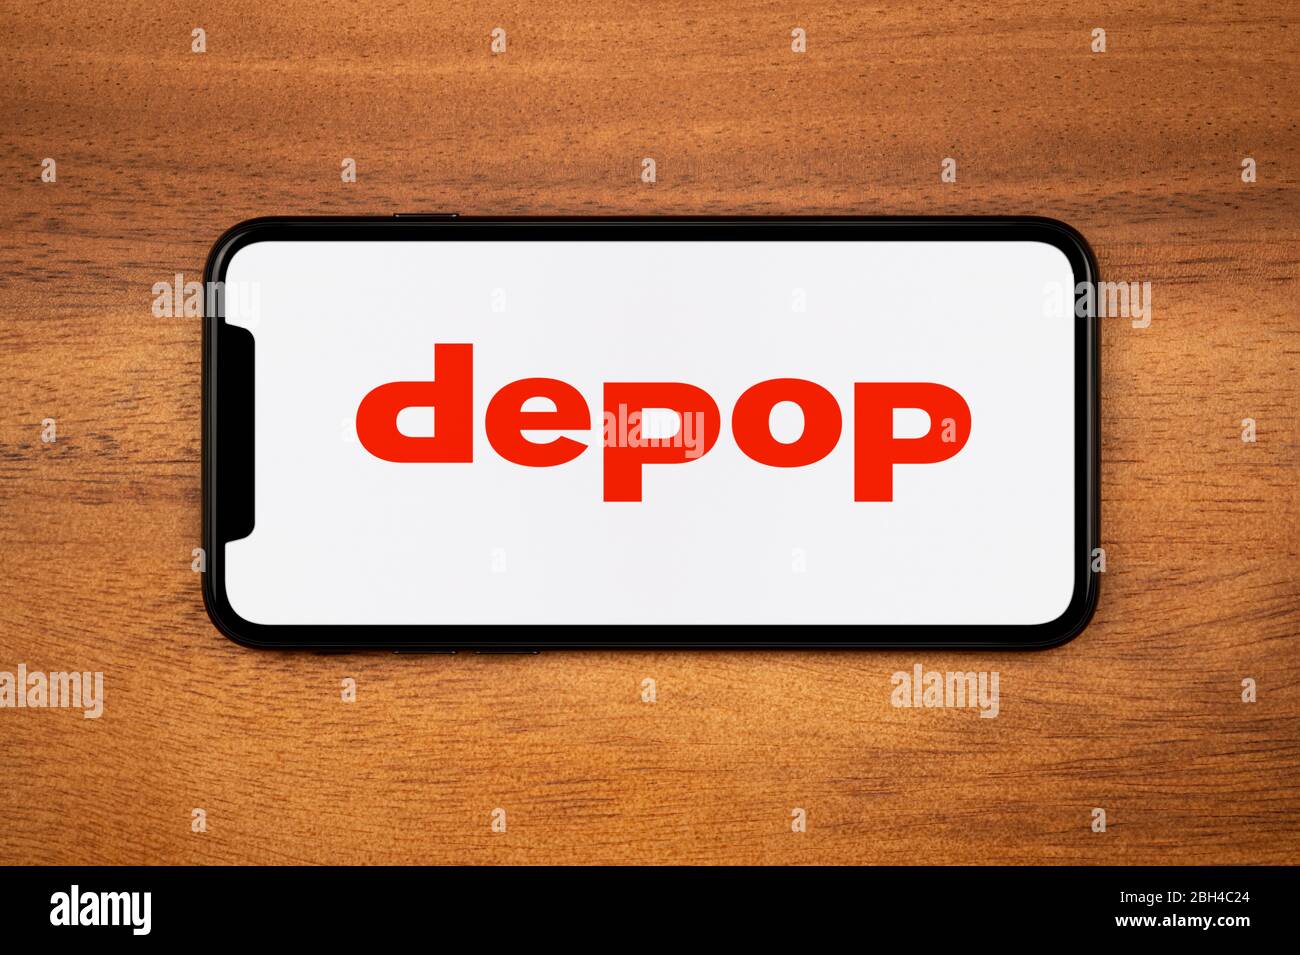 A smartphone showing the Depop logo rests on a plain wooden table (Editorial use only). Stock Photo